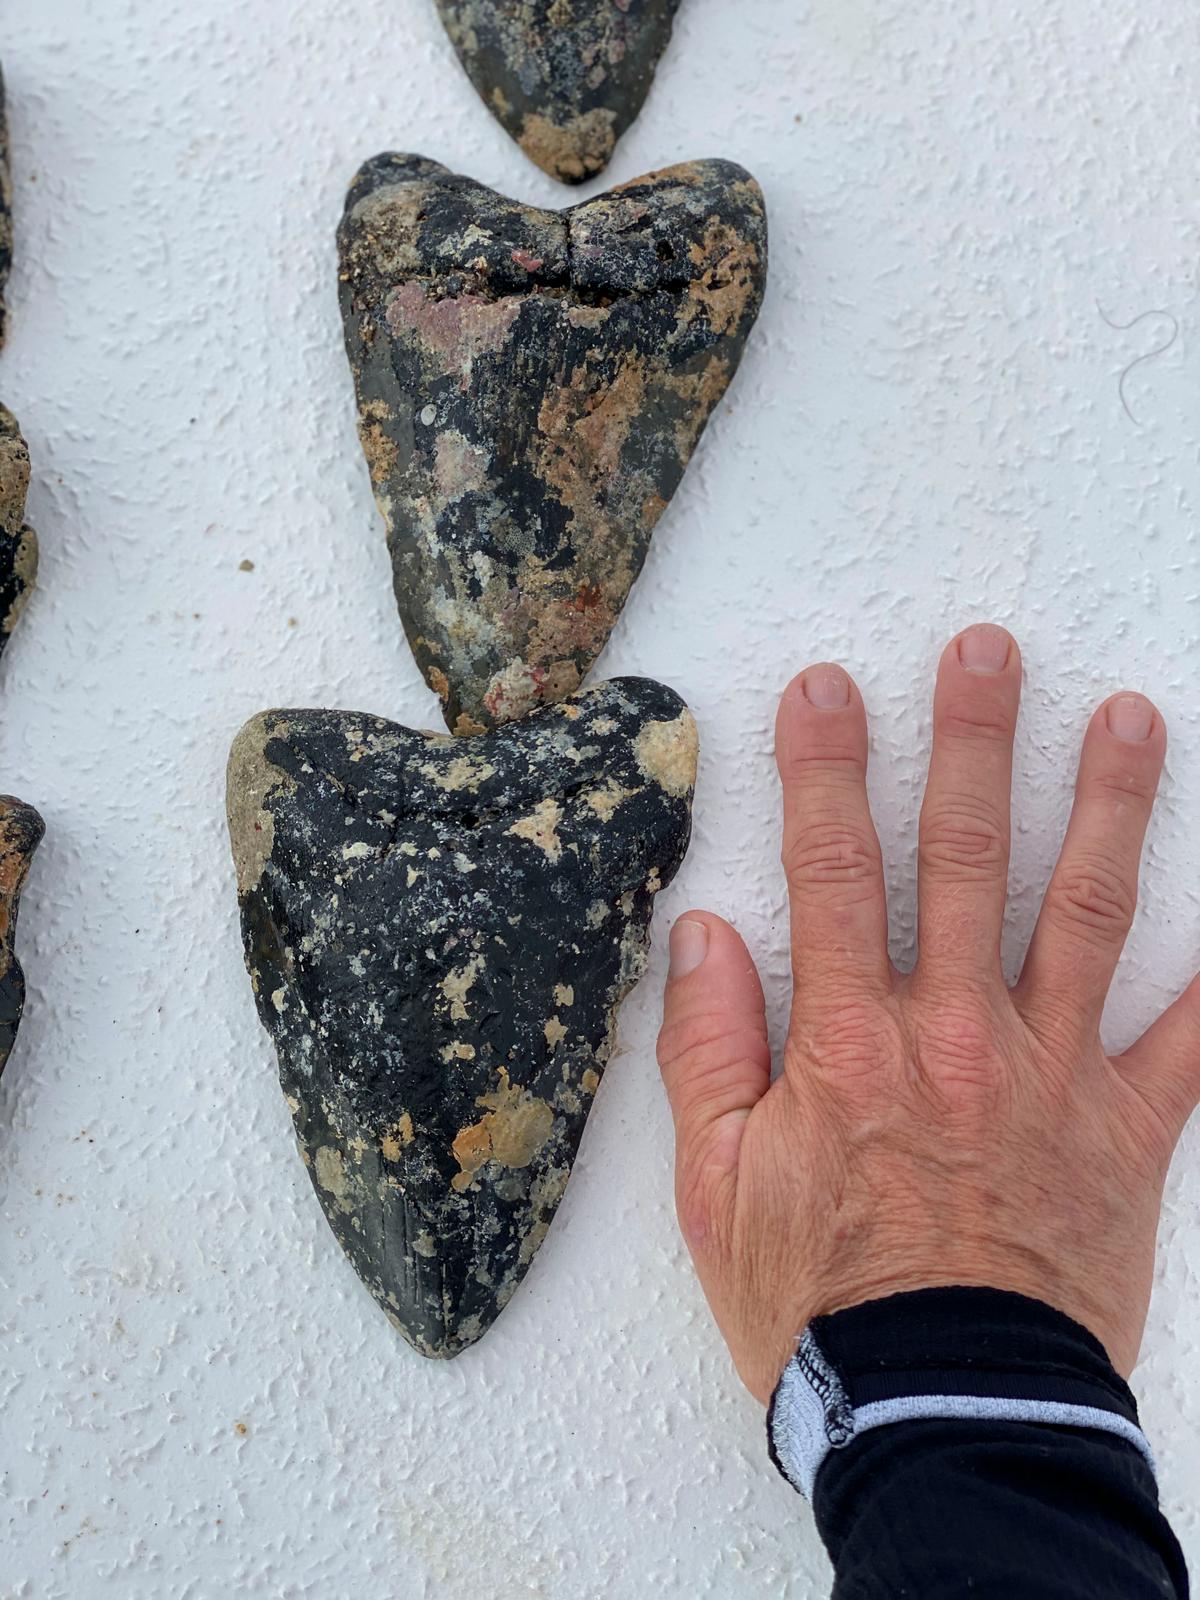 The megalodon teeth that Terri found; hand for scale. (Caters News)